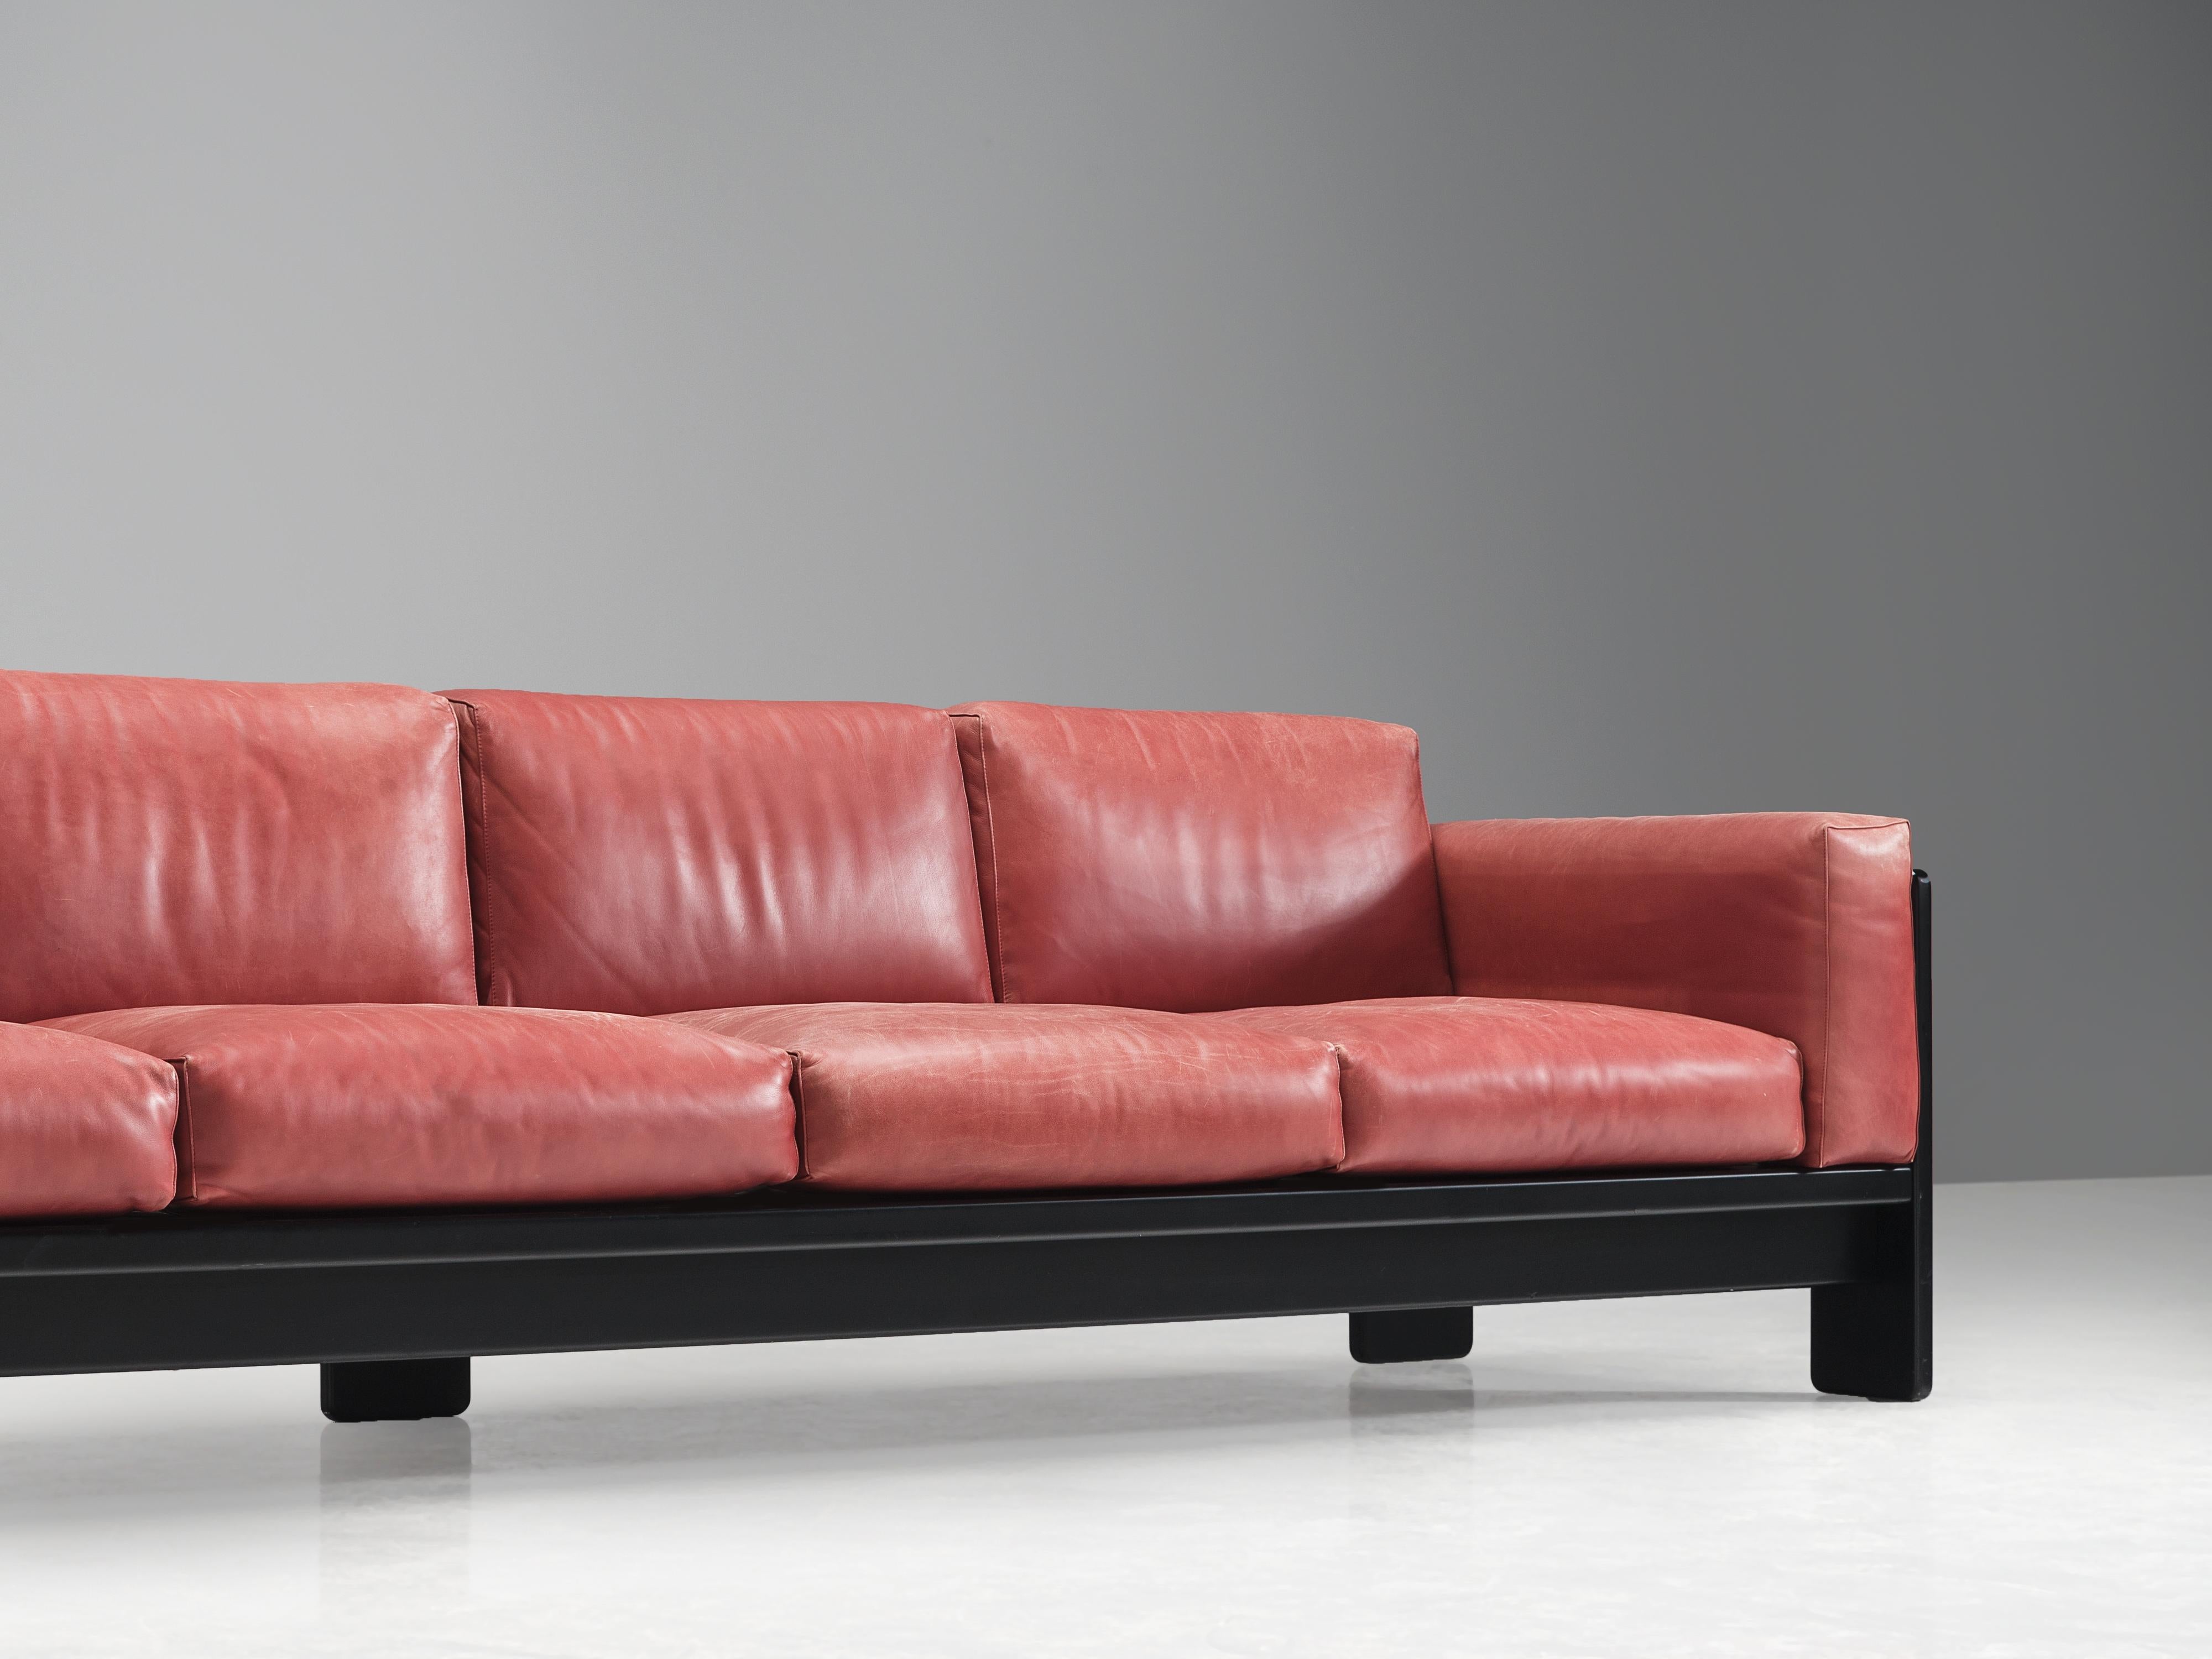 Afra & Tobia Scarpa for Knoll 'Bastiano' Four-Seat Sofa in Red Leather 3